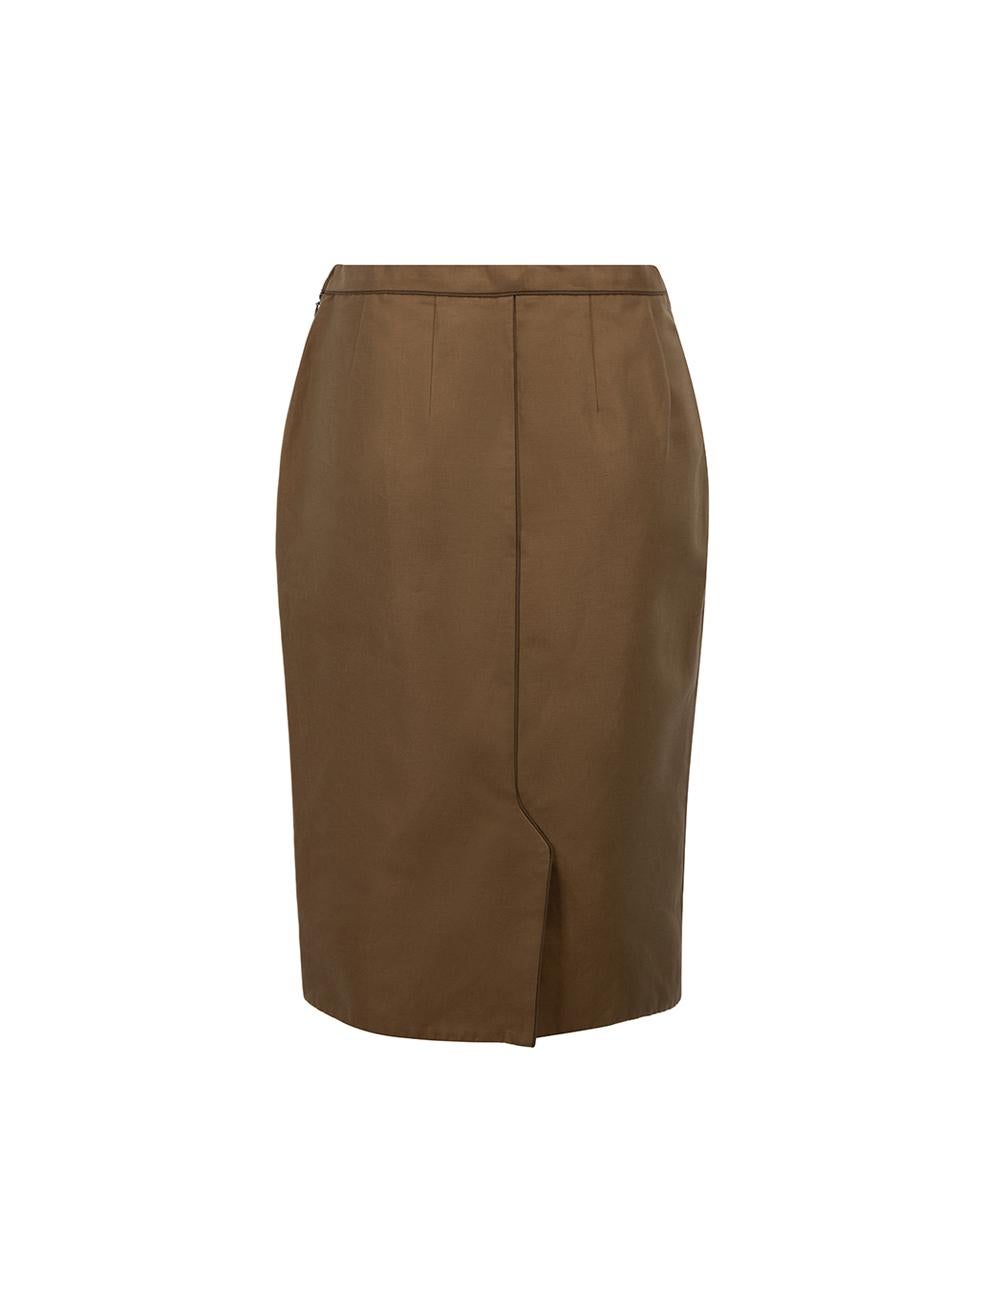 Khaki Knee Length Skirt Size L In Good Condition For Sale In London, GB